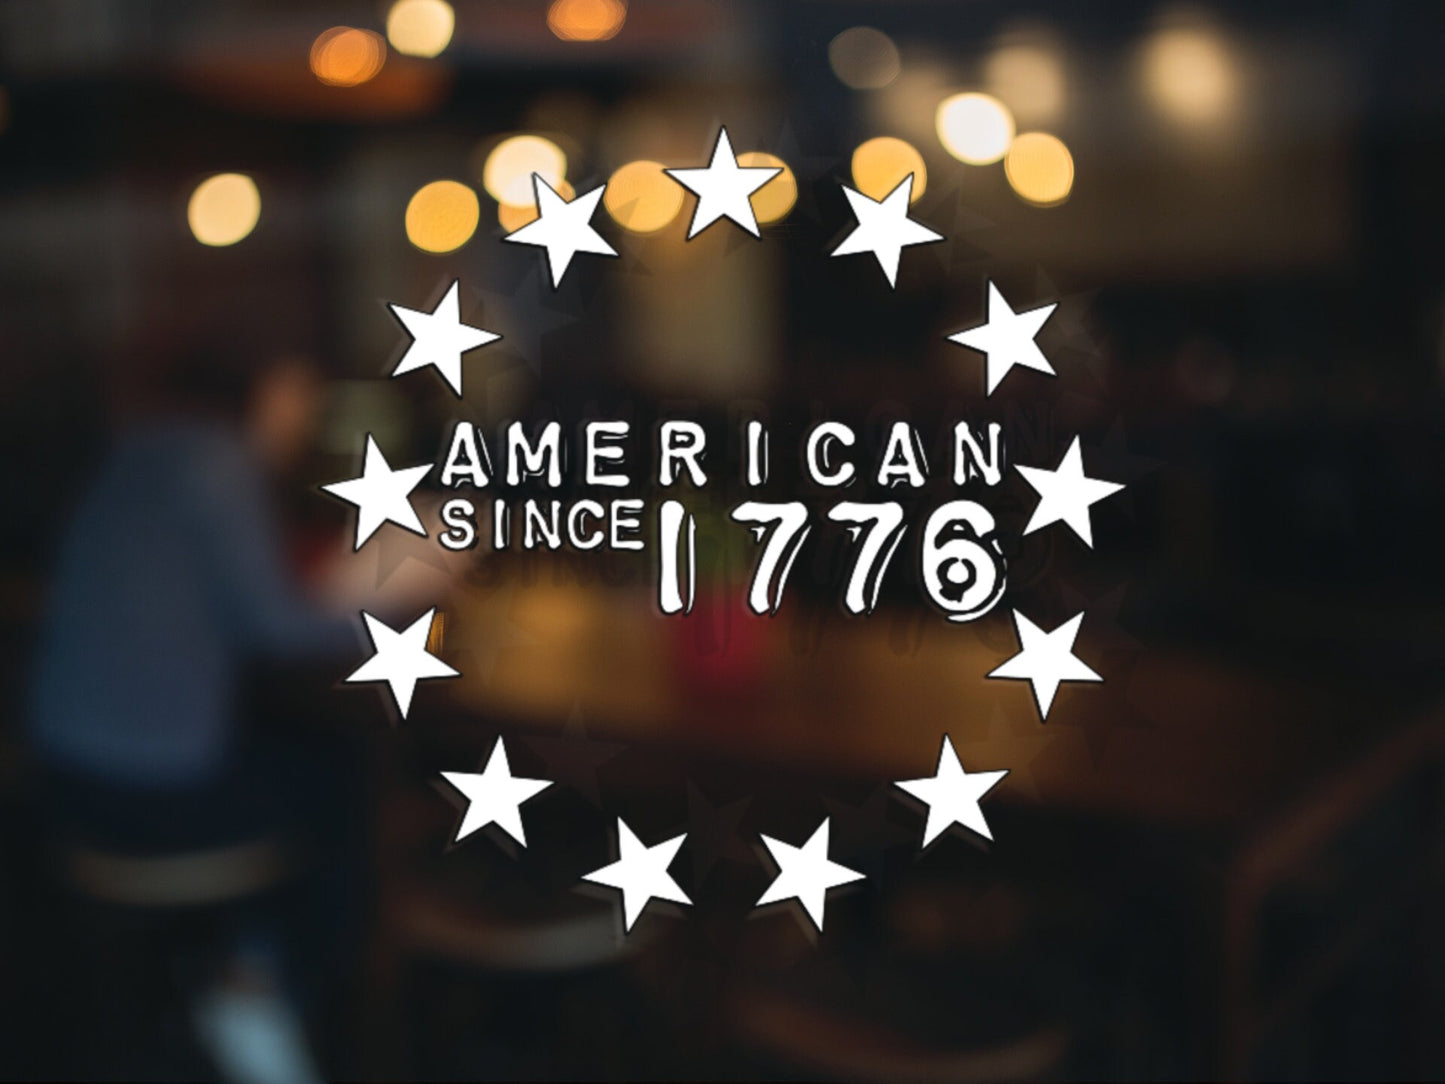 American Since 1776 Decal - Many Colors & Sizes